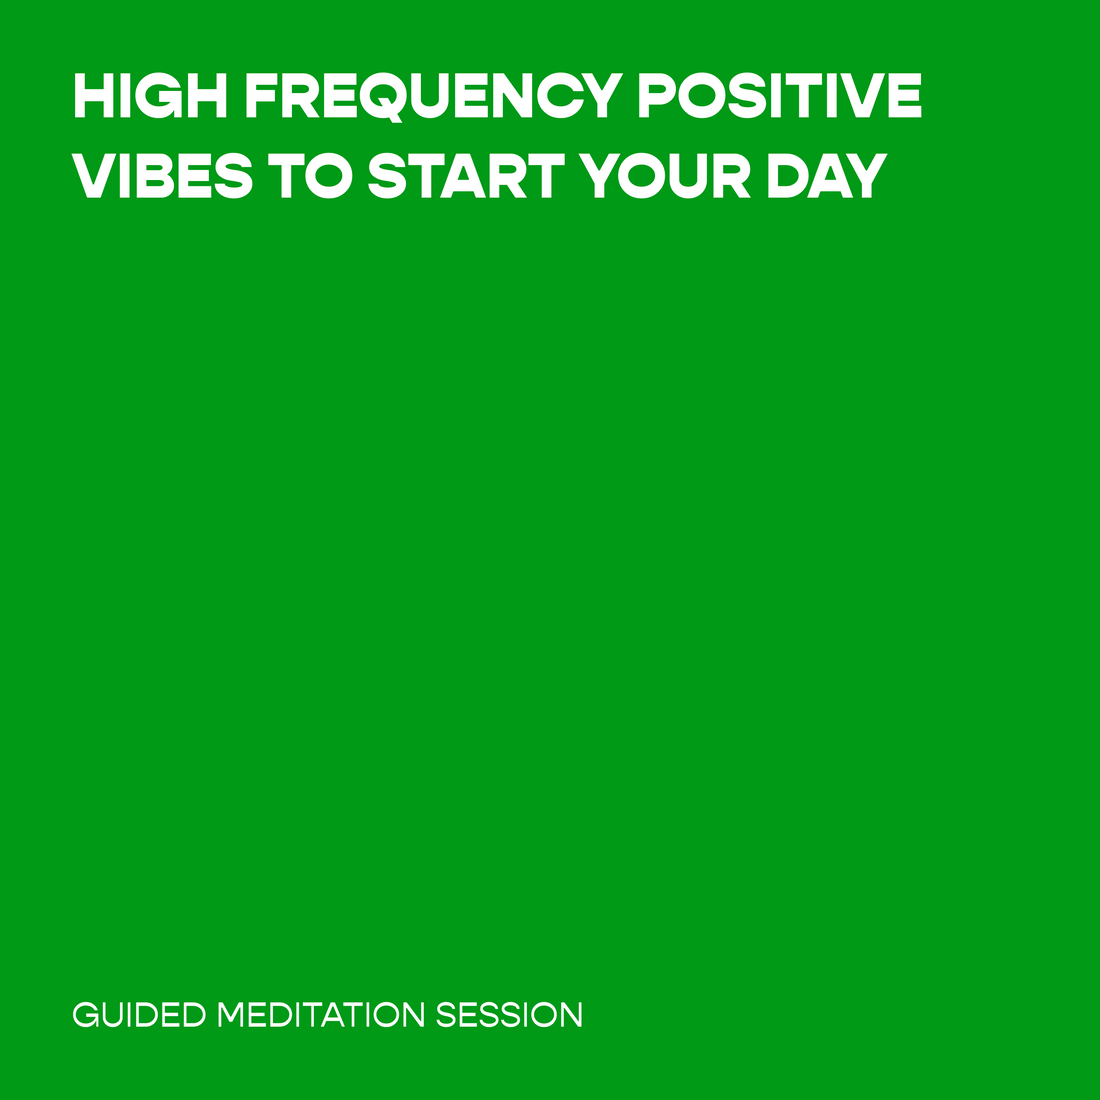 High Frequency Positive Vibes to Start Your Day